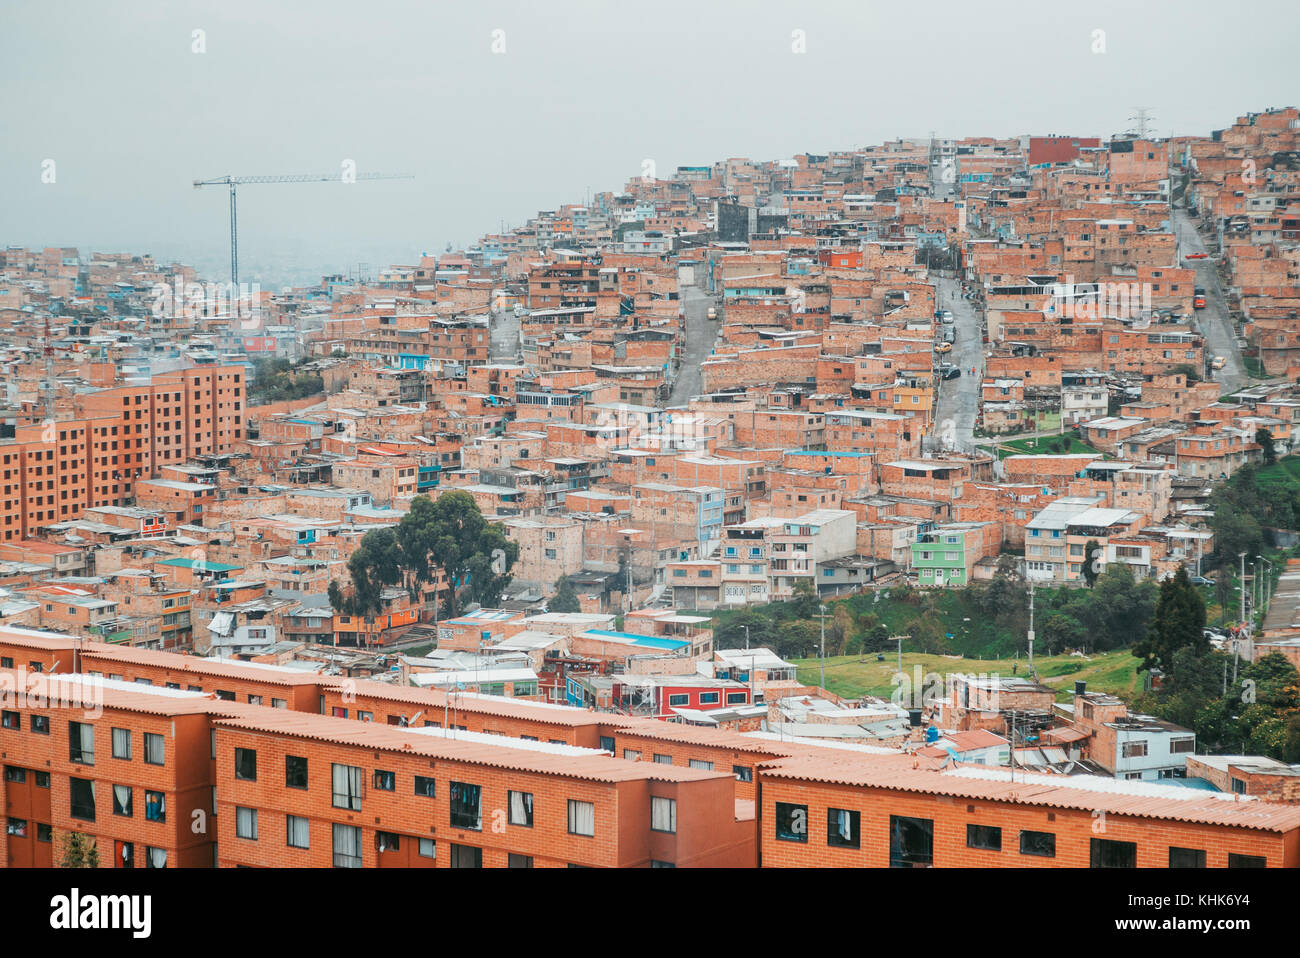 Looking out over the terracotta brick houses on the hillside suburb of Las Colinas, a neighbourhood in Bogotá, Colombia Stock Photo